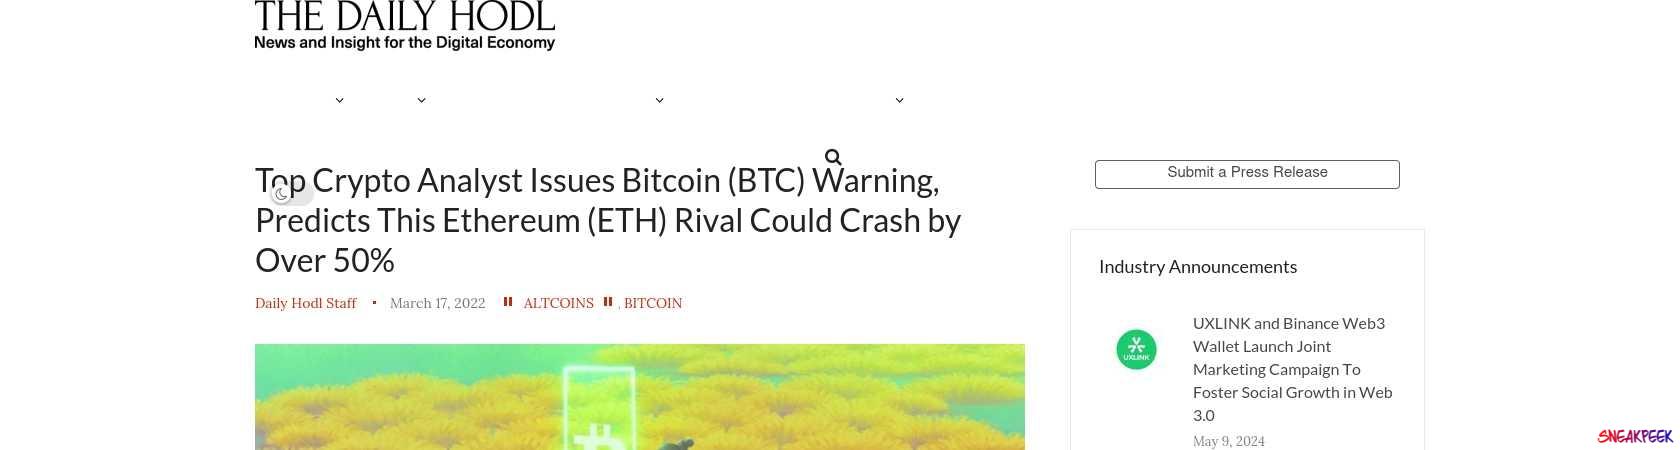 Read the full Article:  ⭲ Top Crypto Analyst Issues Bitcoin (BTC) Warning, Predicts This Ethereum (ETH) Rival Could Crash by Over 50%